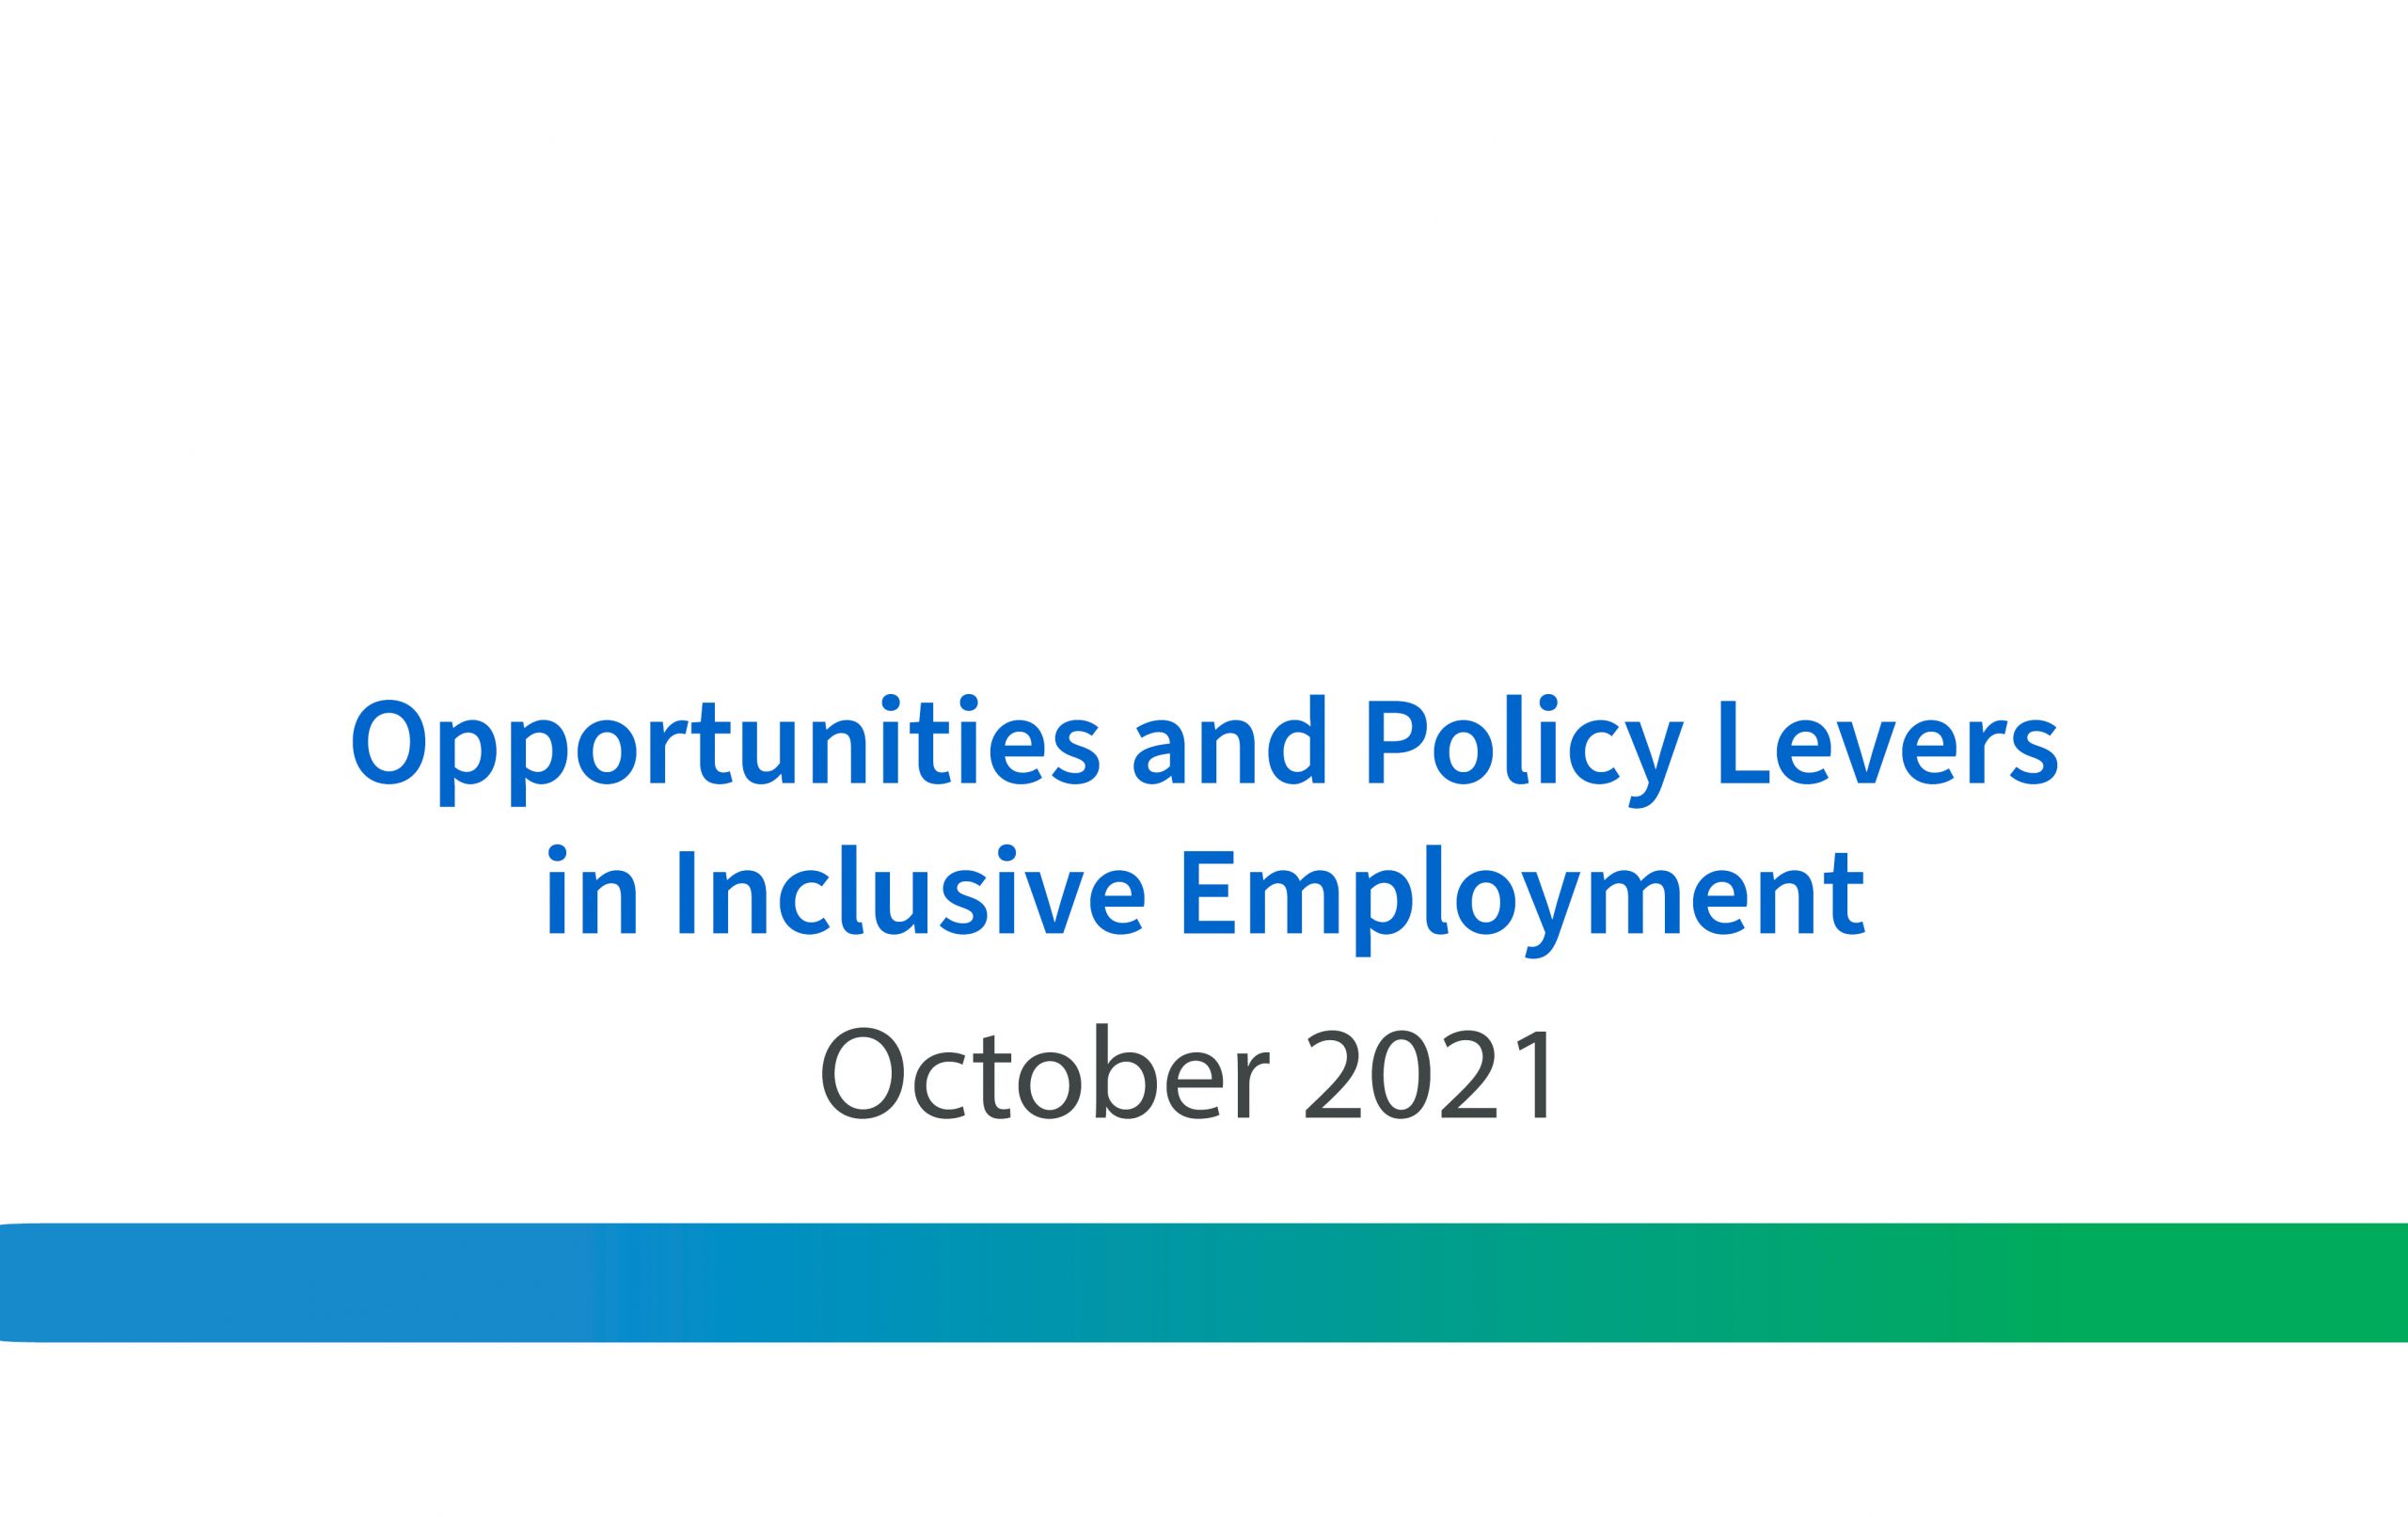 On a white background, in the middle of the image in blue the text reads, "Opportunities and Policy Levers in Inclusive Employment". The text below it in black reads, "October 2021." Below that is a decorative bar in blue and green colors.